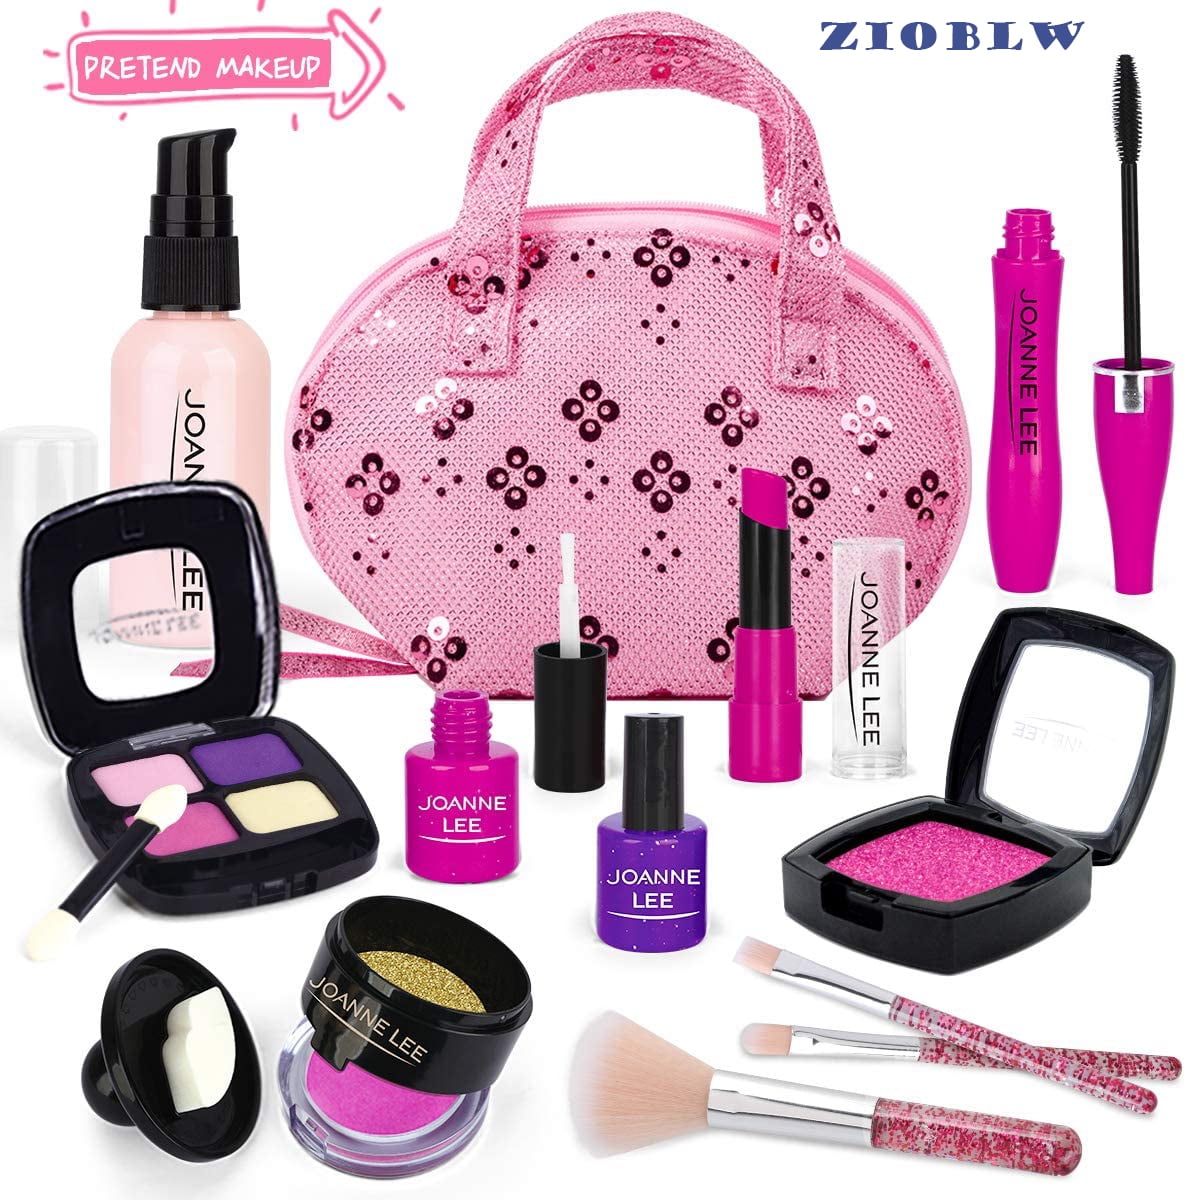 Zioblw Pretend Makeup Kit Toys for 2, 3, 4, 5 Year Old Girls, First Make Up Set for Little Princess Play Dress Up, Kids Cosmetic, Best Birthday Gift